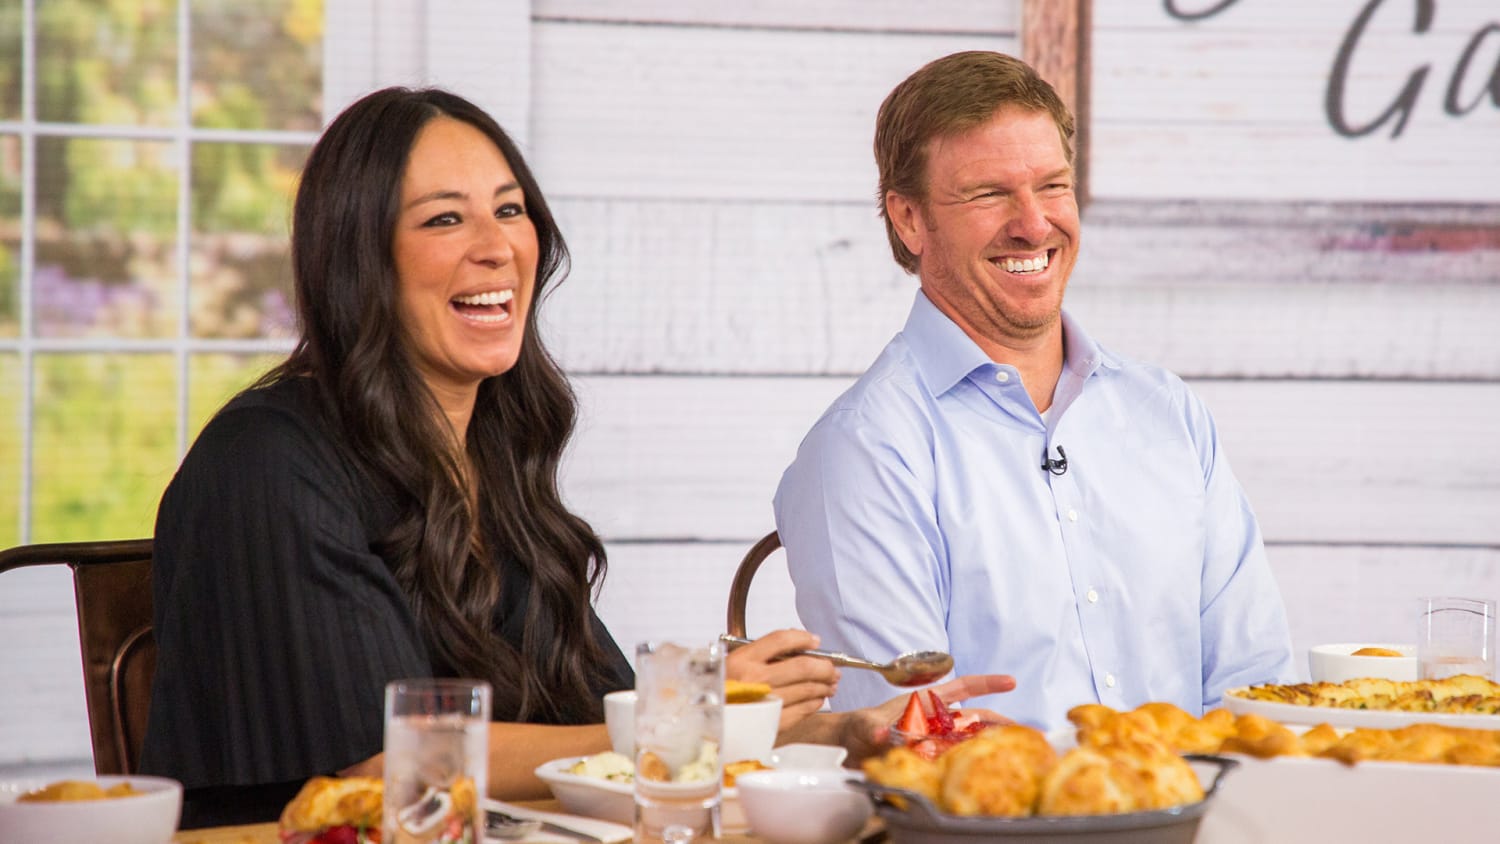 Joanna Gaines pens sweet, supportive message to Chip ahead of his first mar...